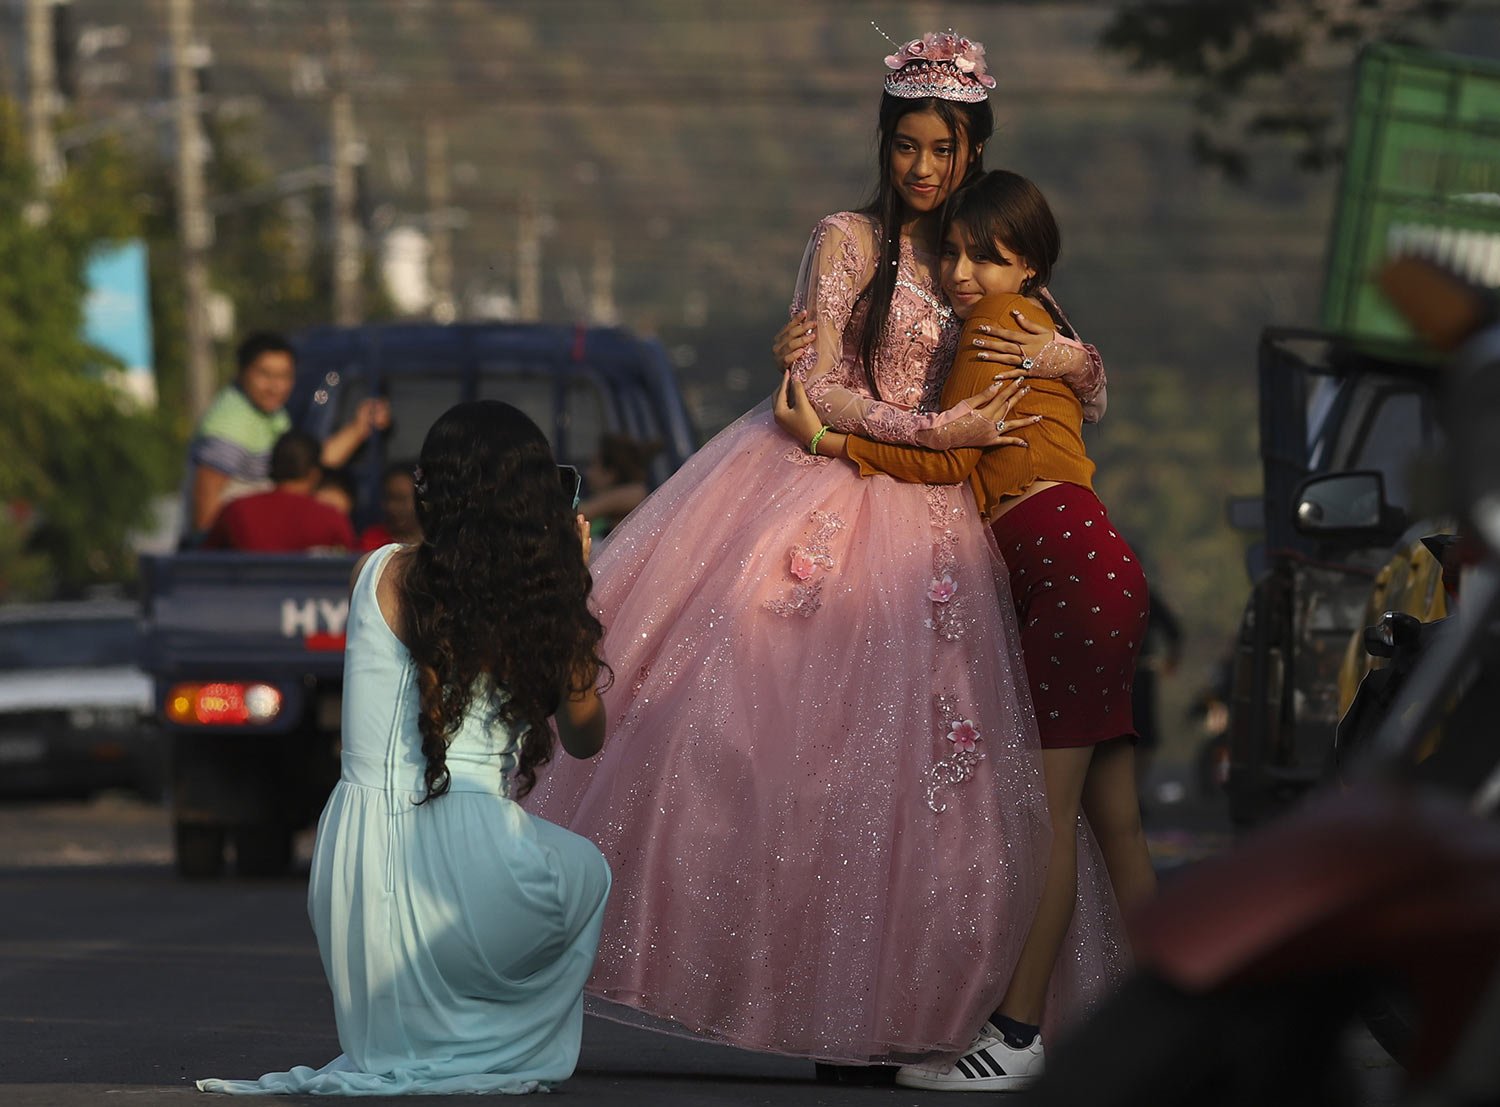  A youth celebrating her 15th birthday, or quinceañera, poses for photos on the main street of La Campanera, during the celebration in an evangelical church in Soyapango, El Salvador, March 5, 2023. Even stepping foot on this street would have been u